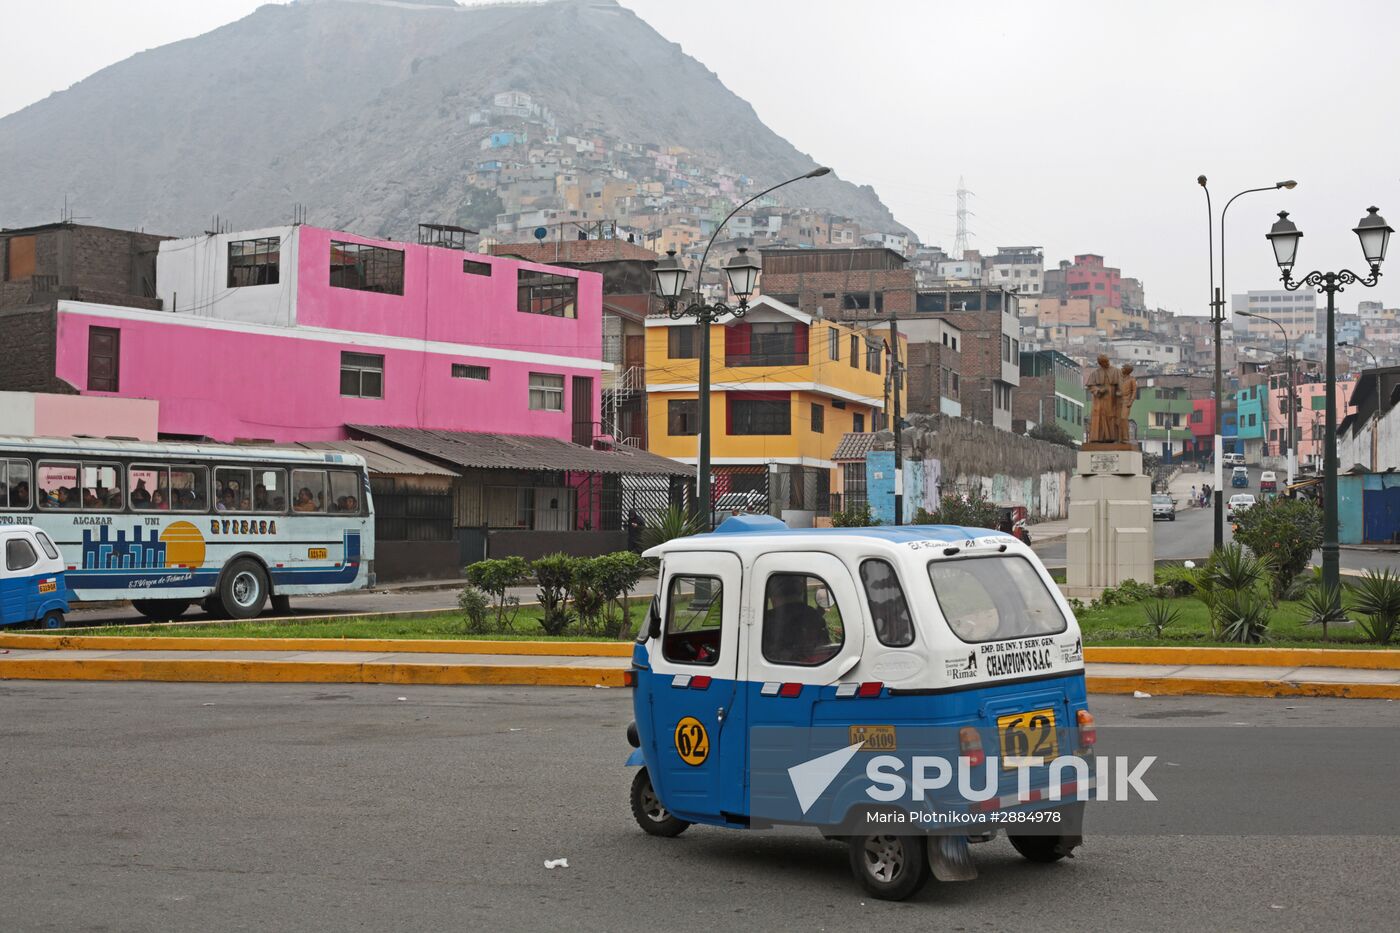 Cities of the world. Lima